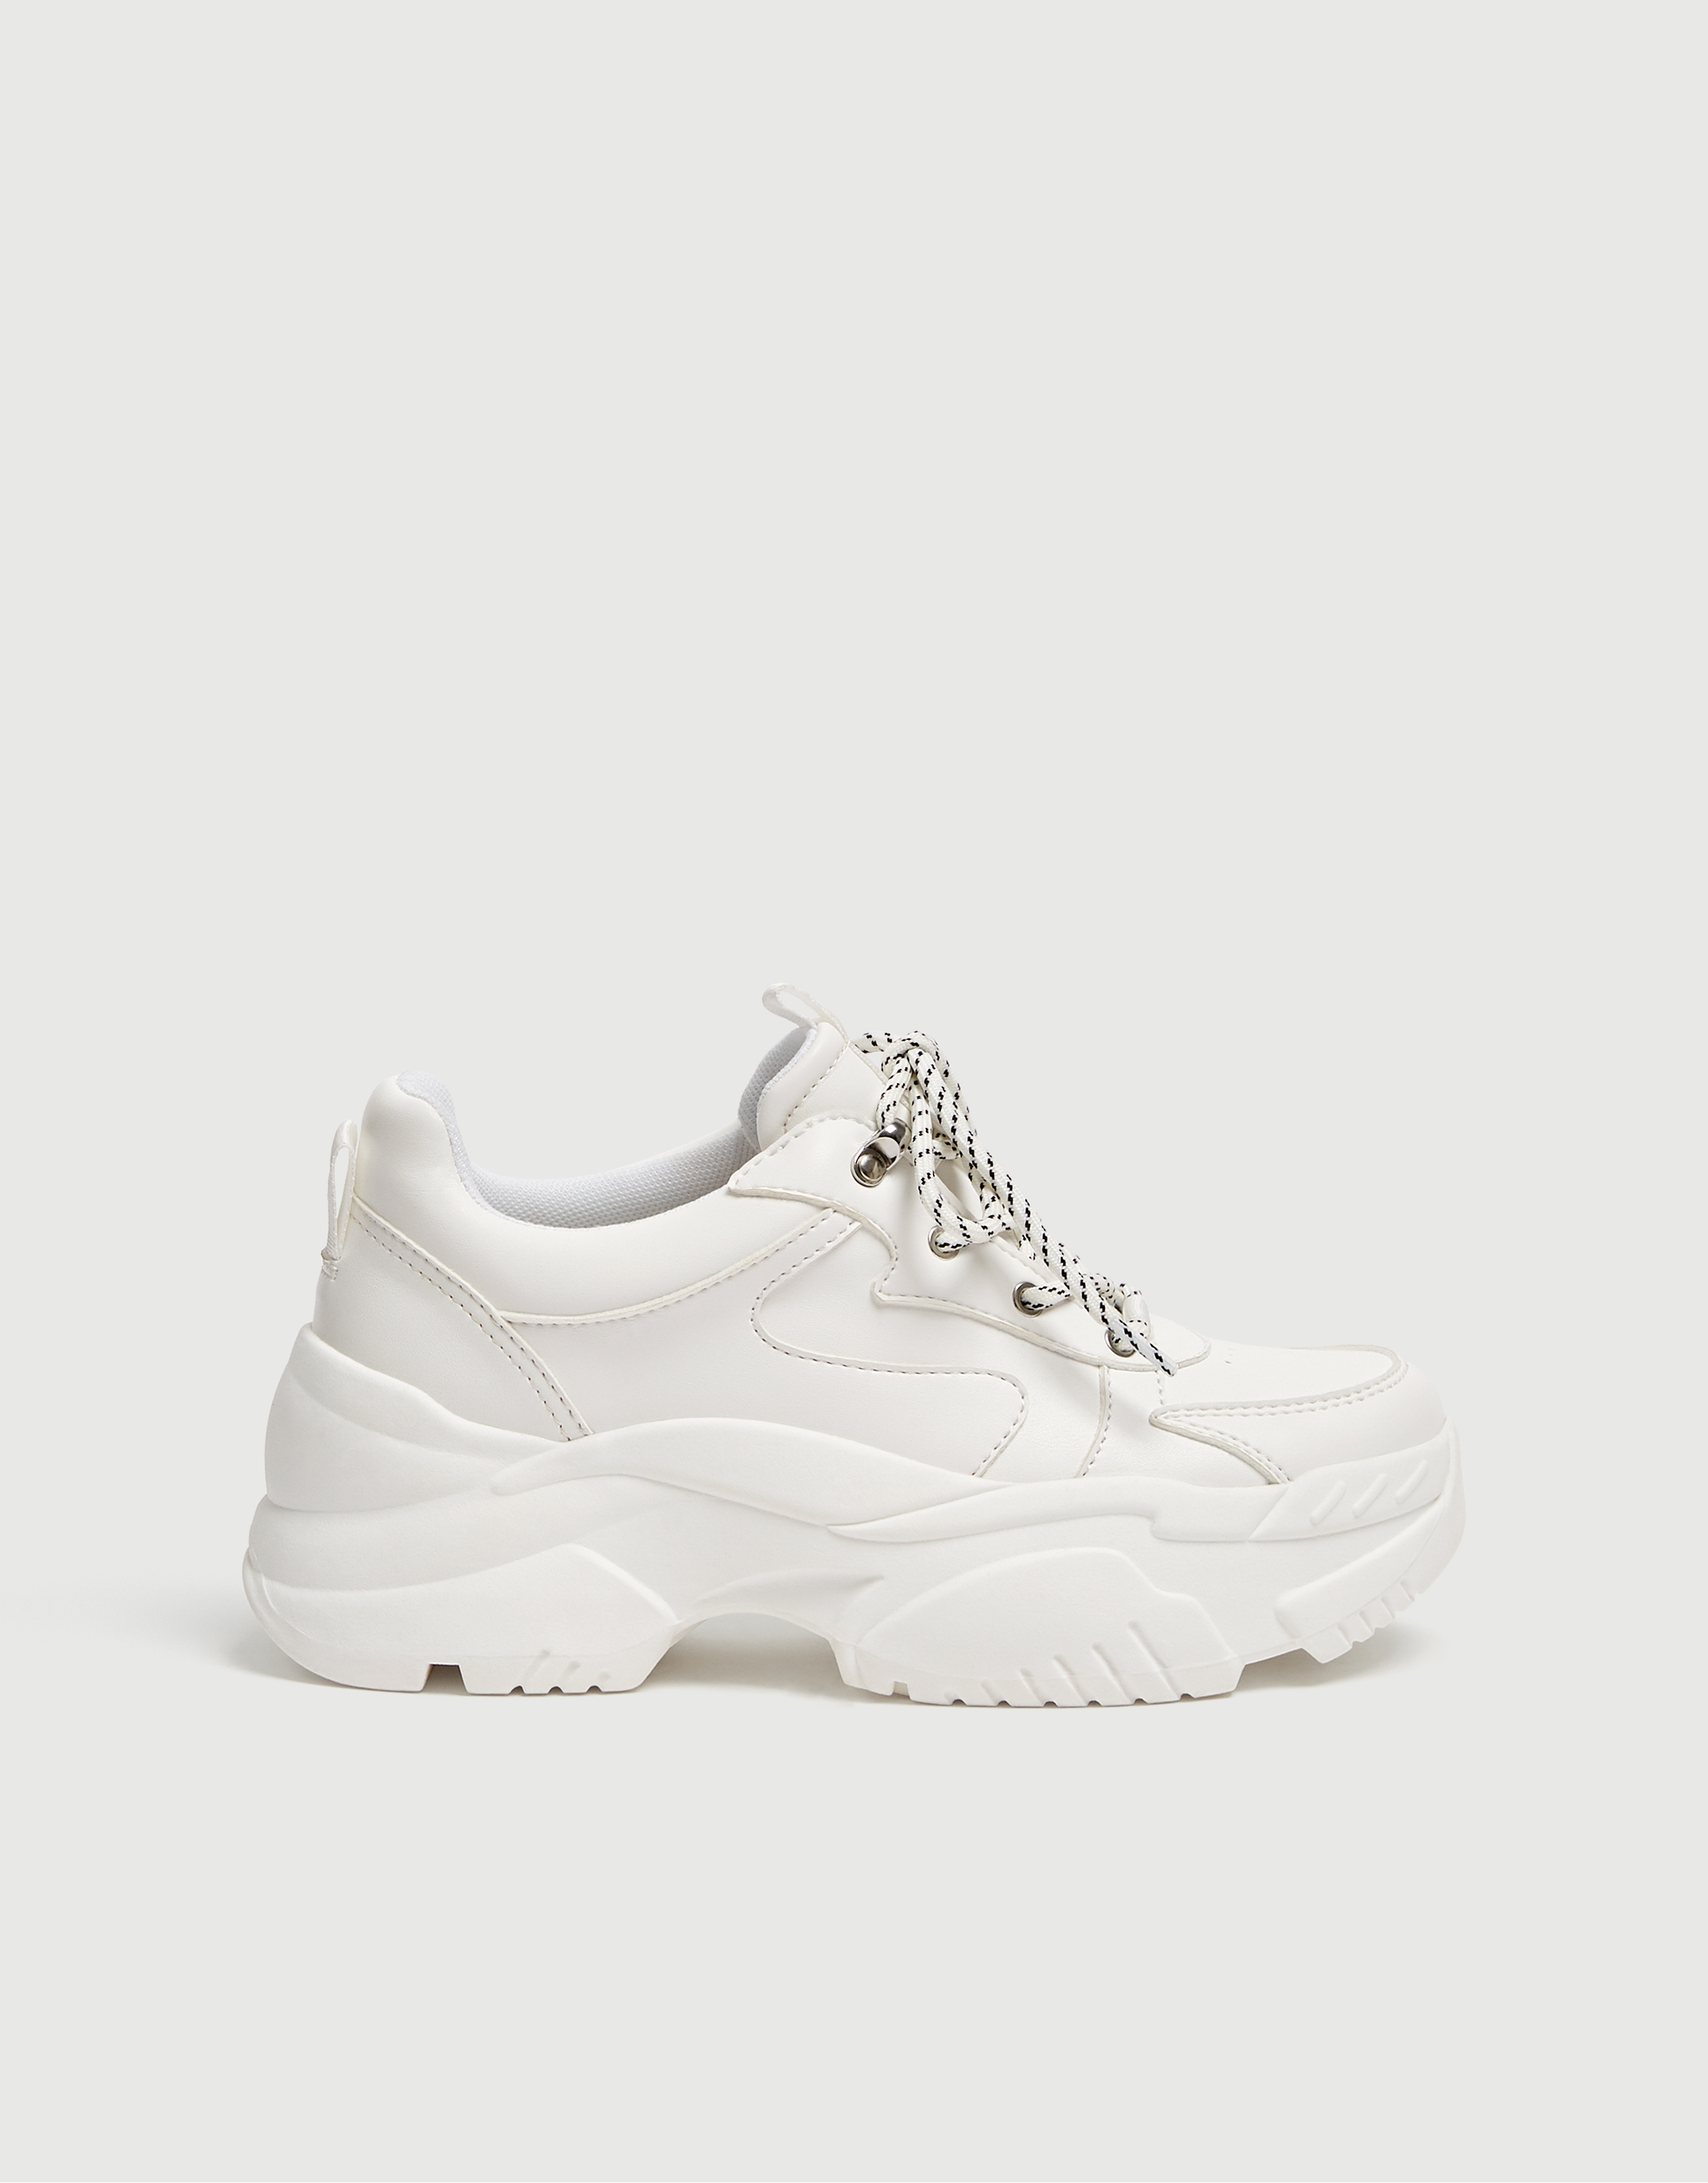 all white platform trainers